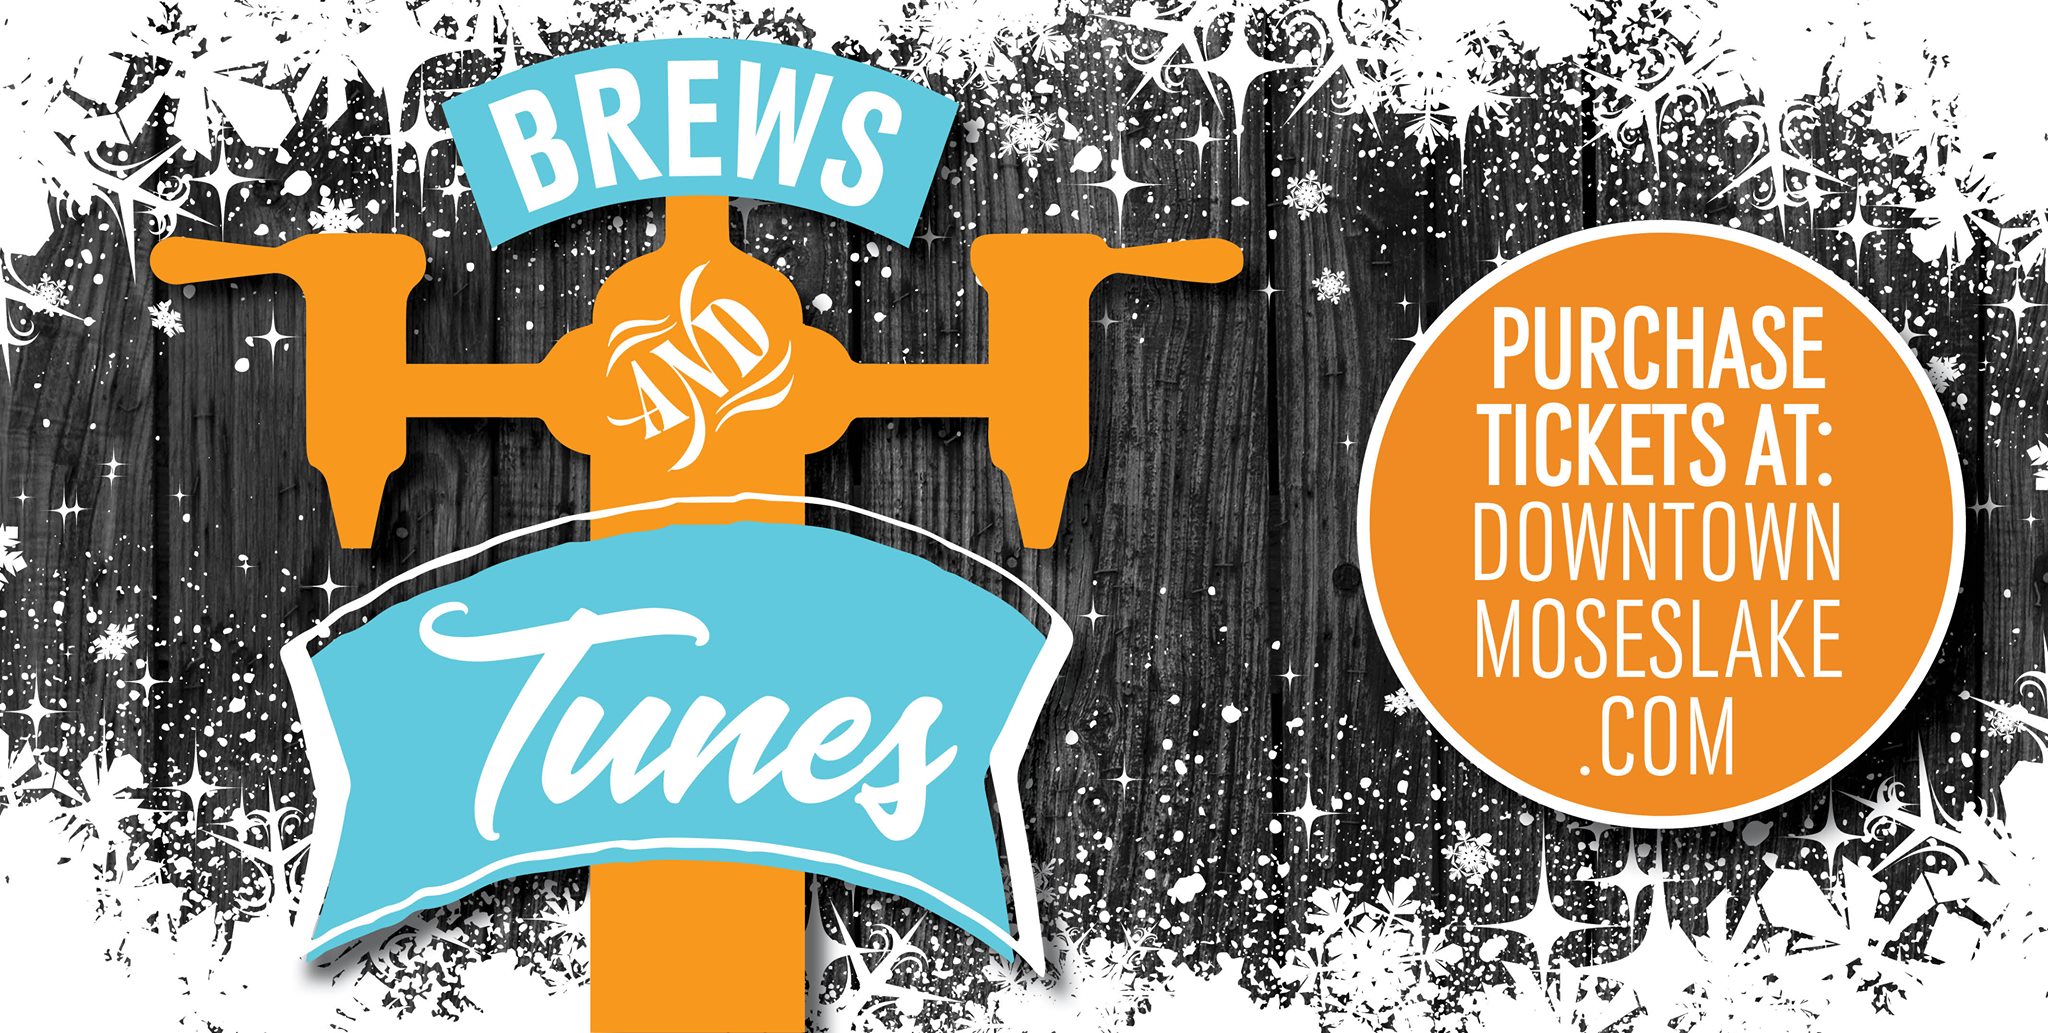 <h1 class="tribe-events-single-event-title">3rd Annual Brews & Tunes</h1>